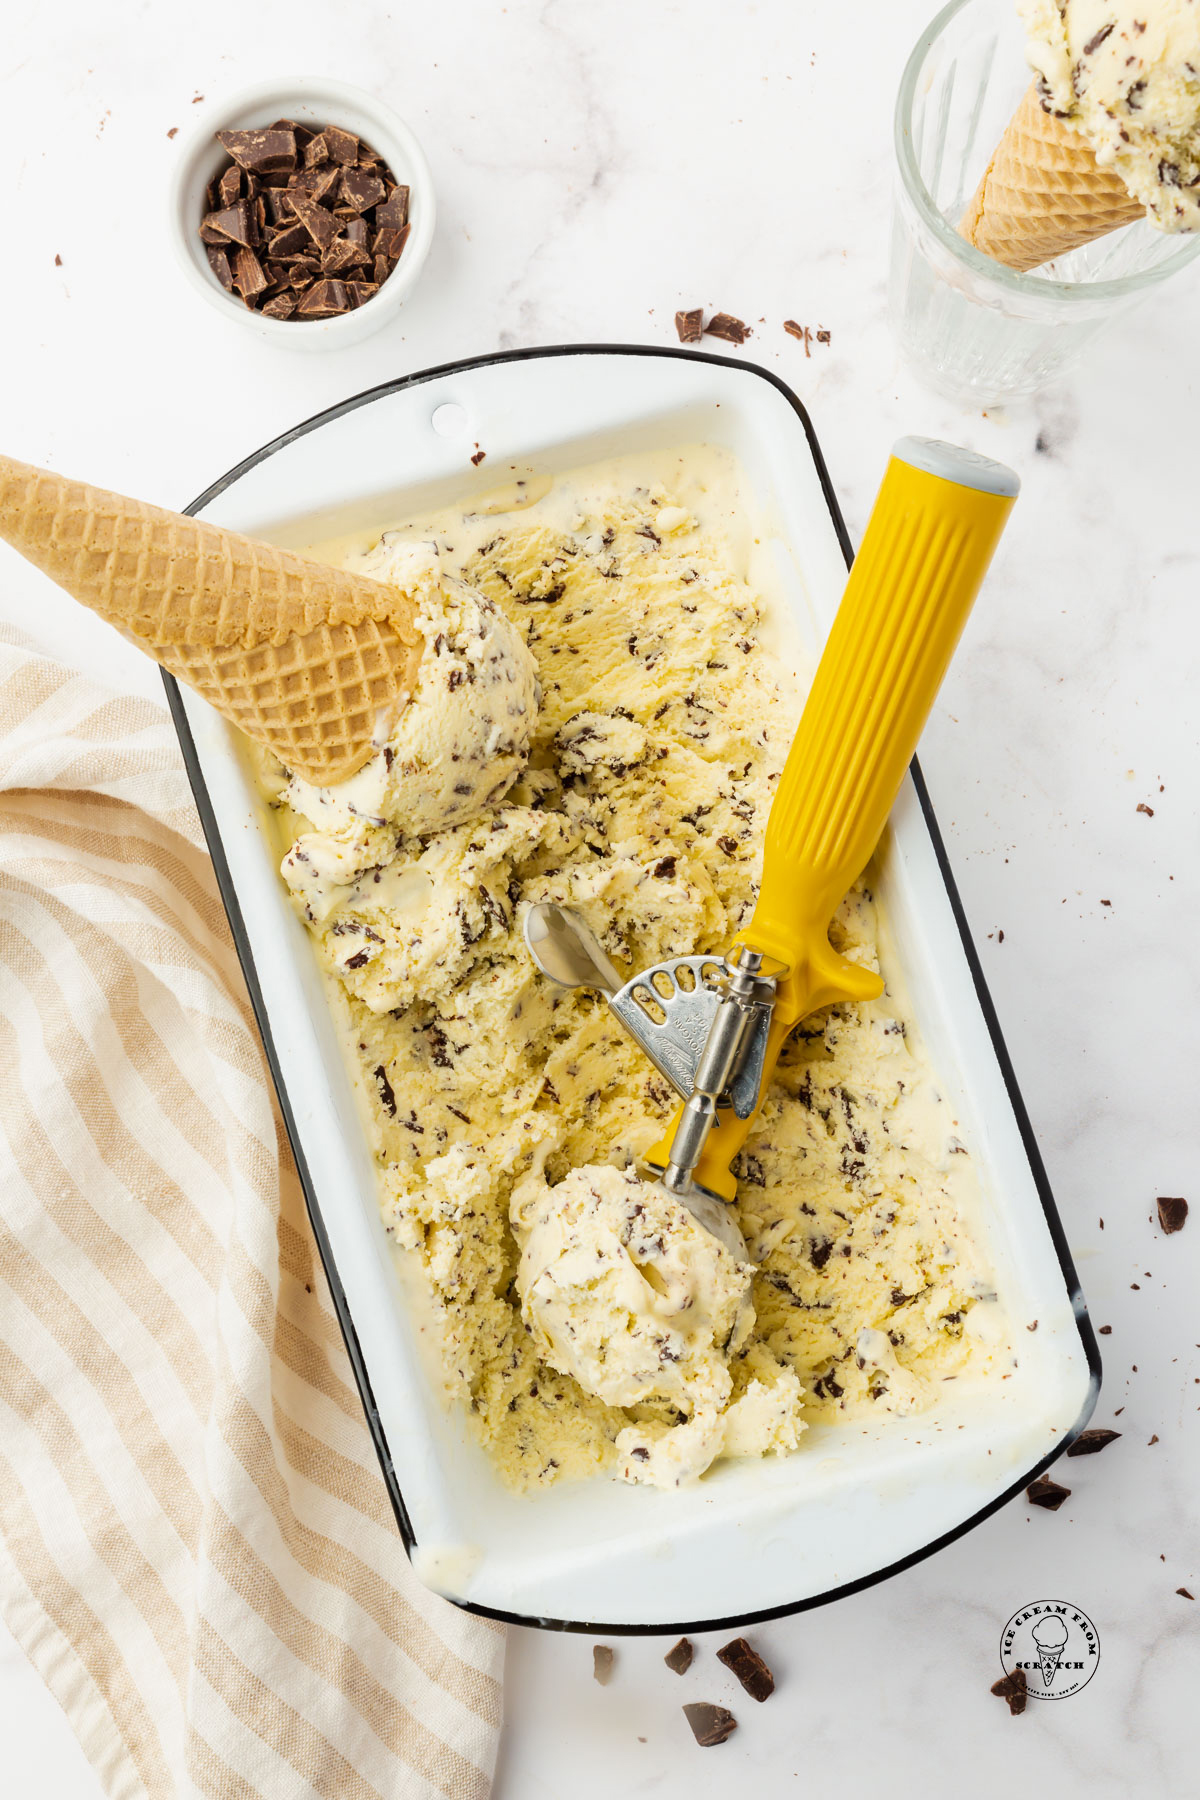 stracciatella gelato in a white loaf pan. A metal scoop with a yellow handle is making scoops for a cone.